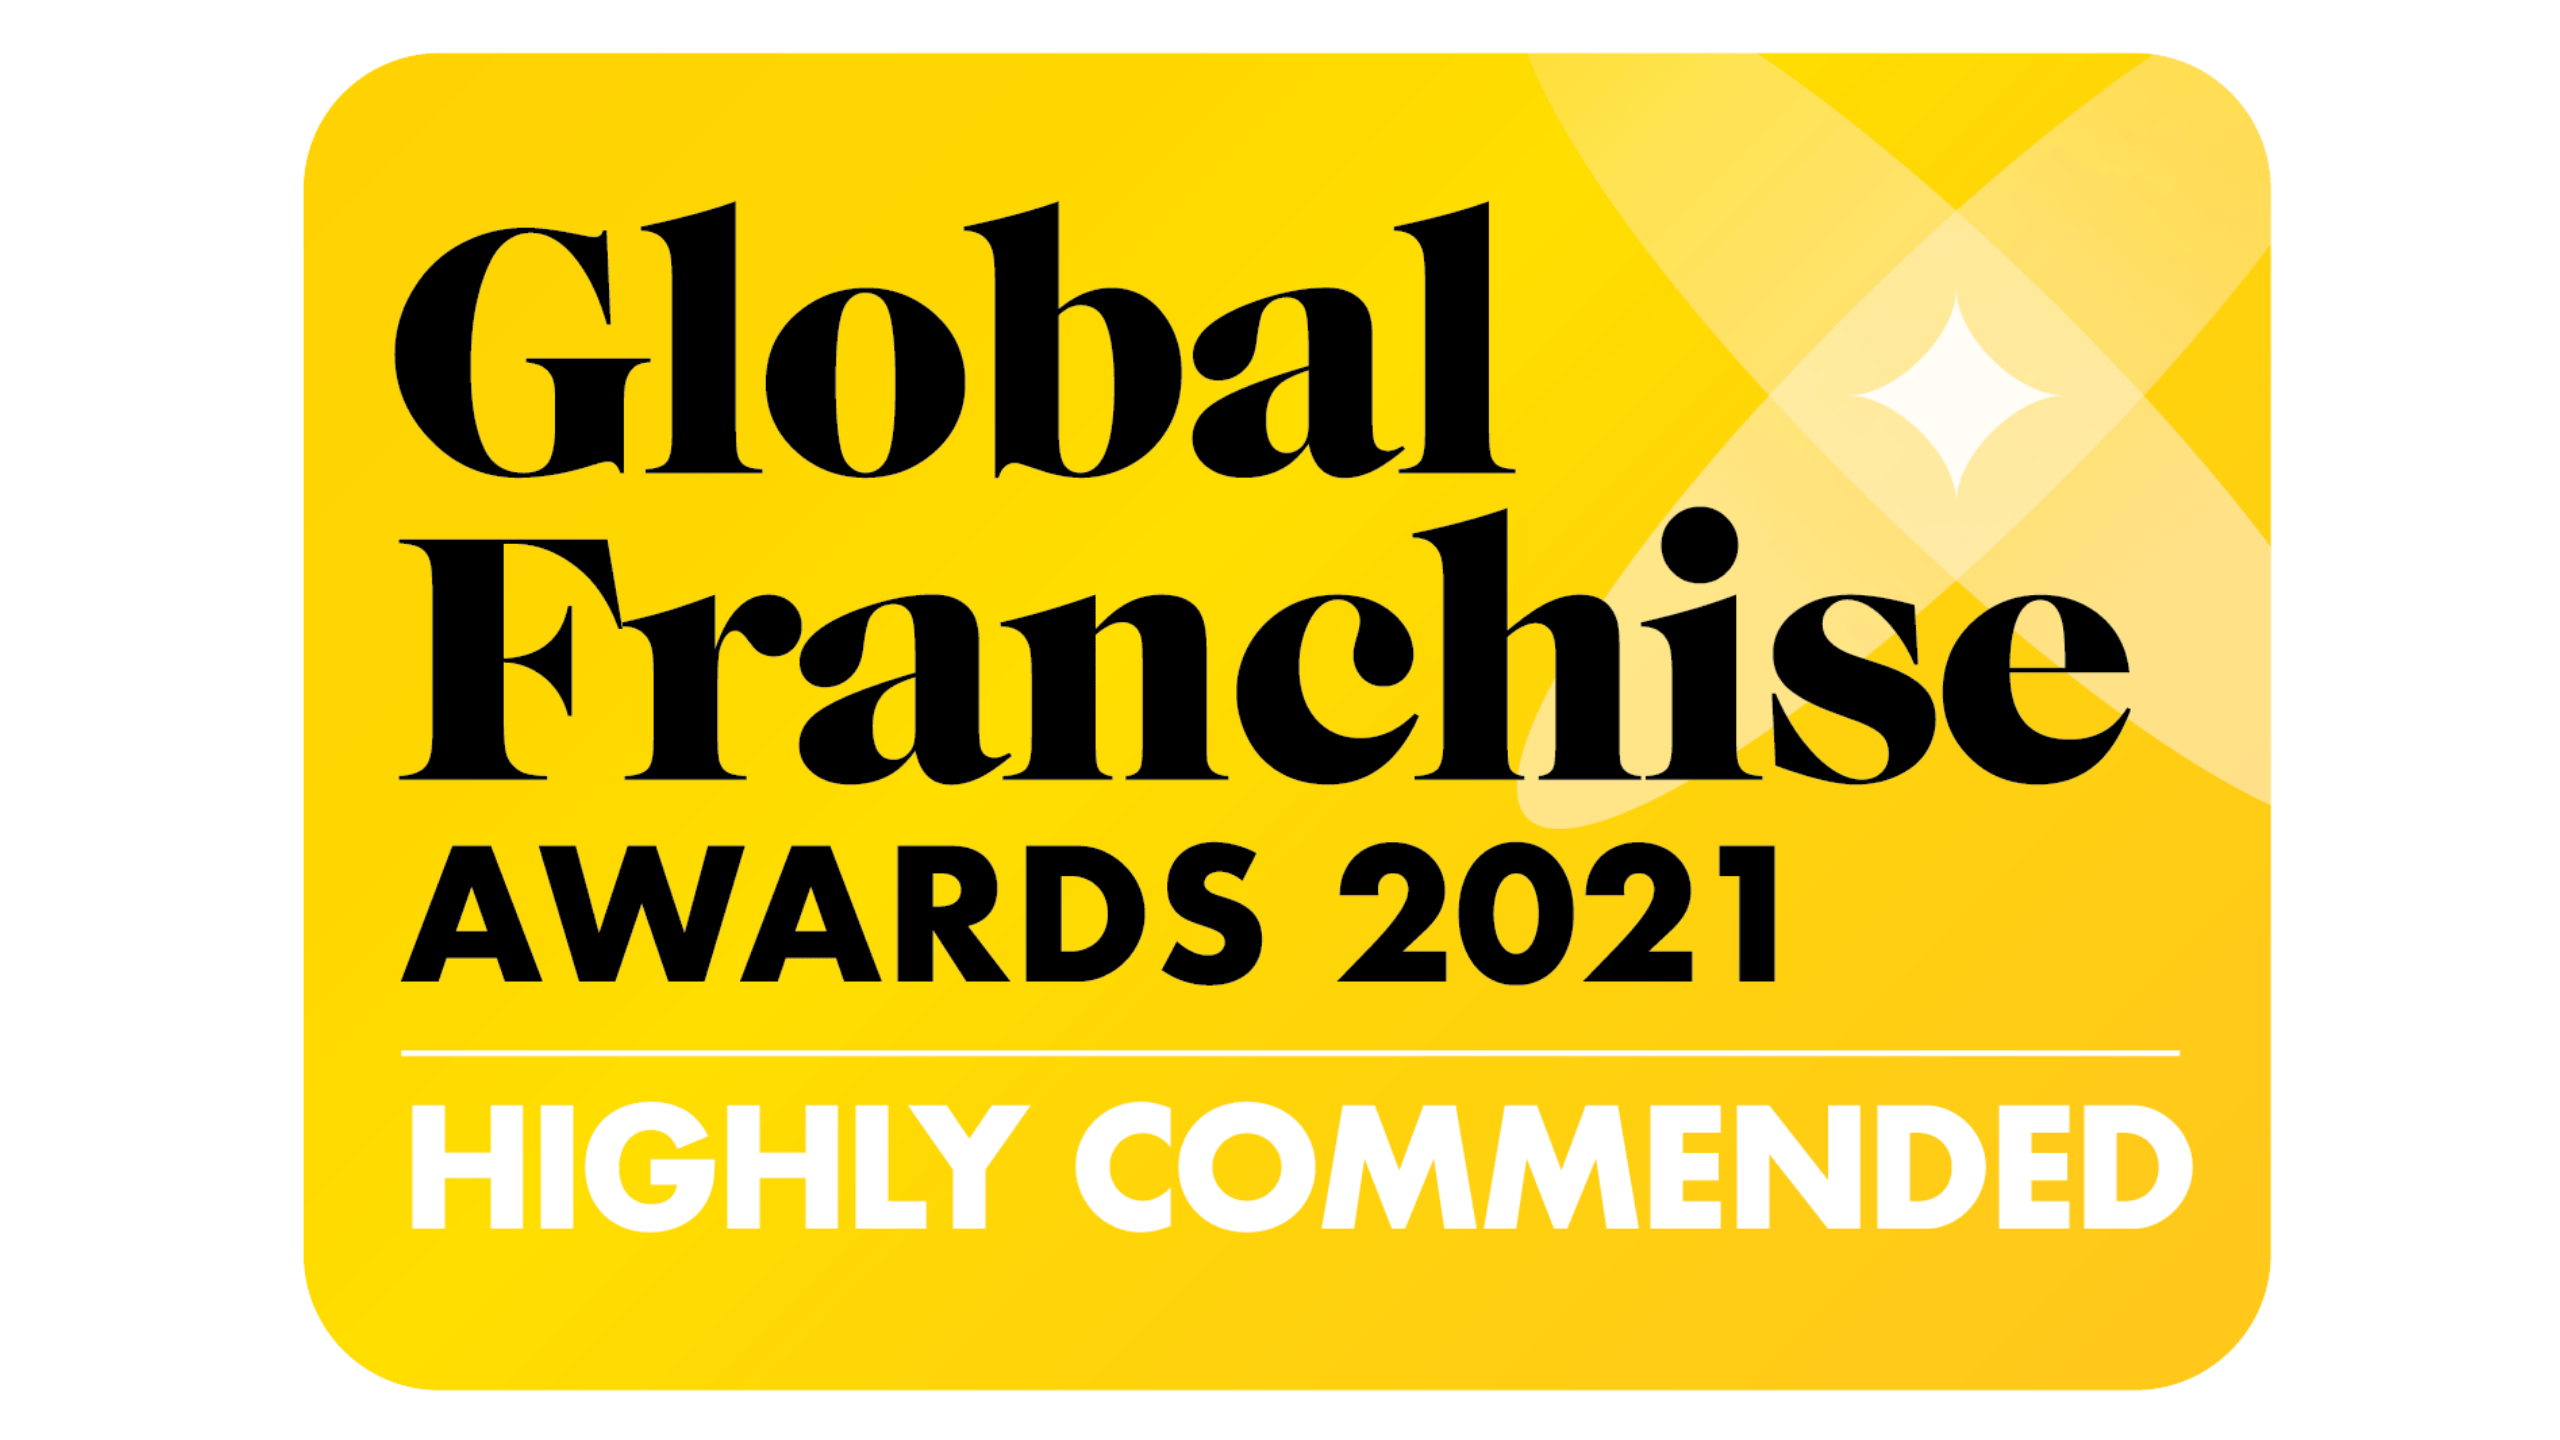 Kare Plus Recognised as a ‘Highly Commended’ Nursing & Care Franchise